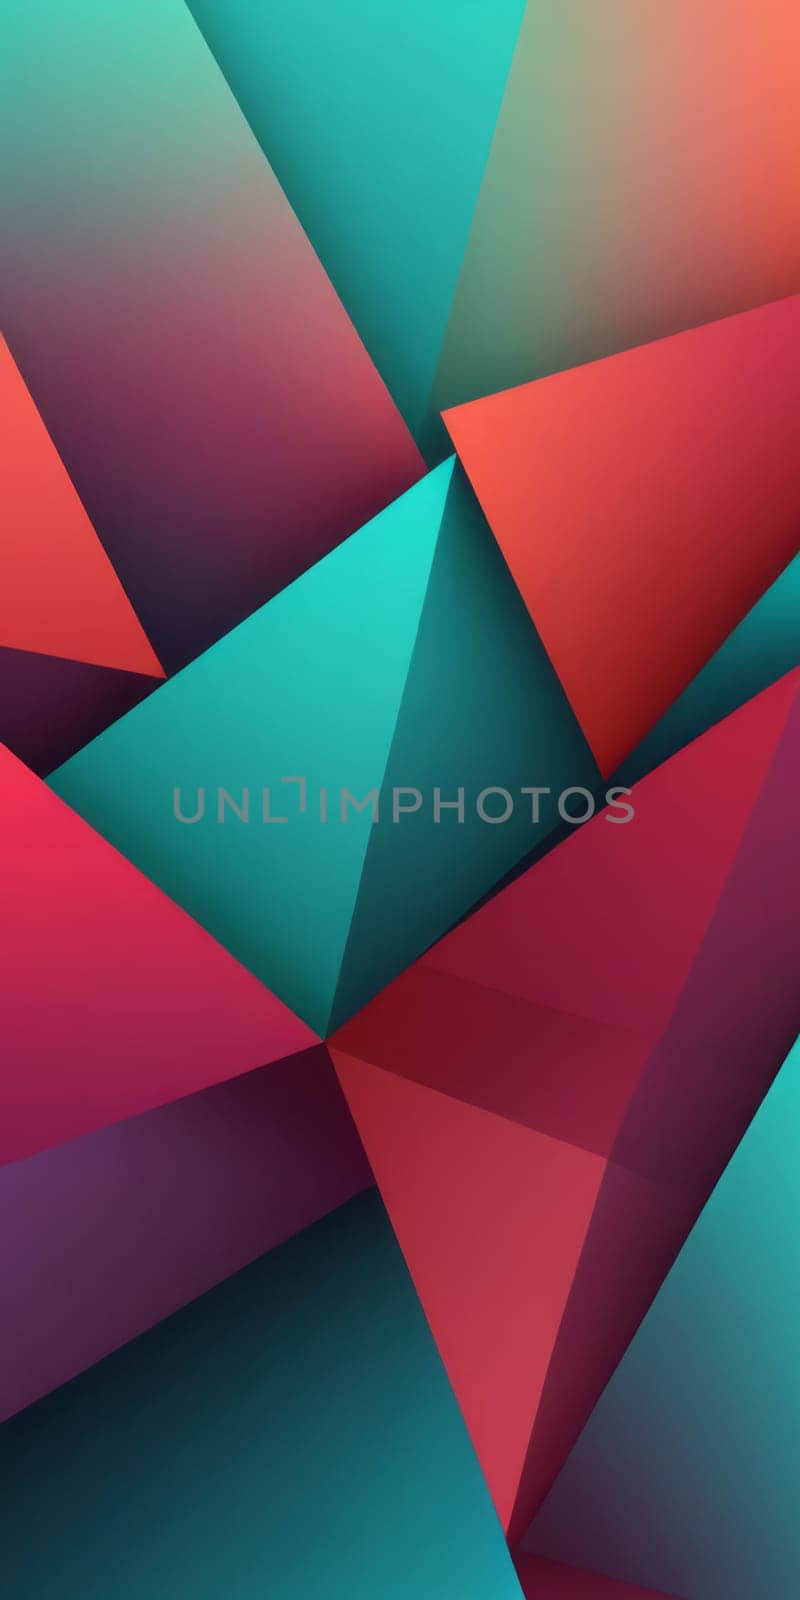 Trapezoidal Shapes in Teal and Crimson by nkotlyar